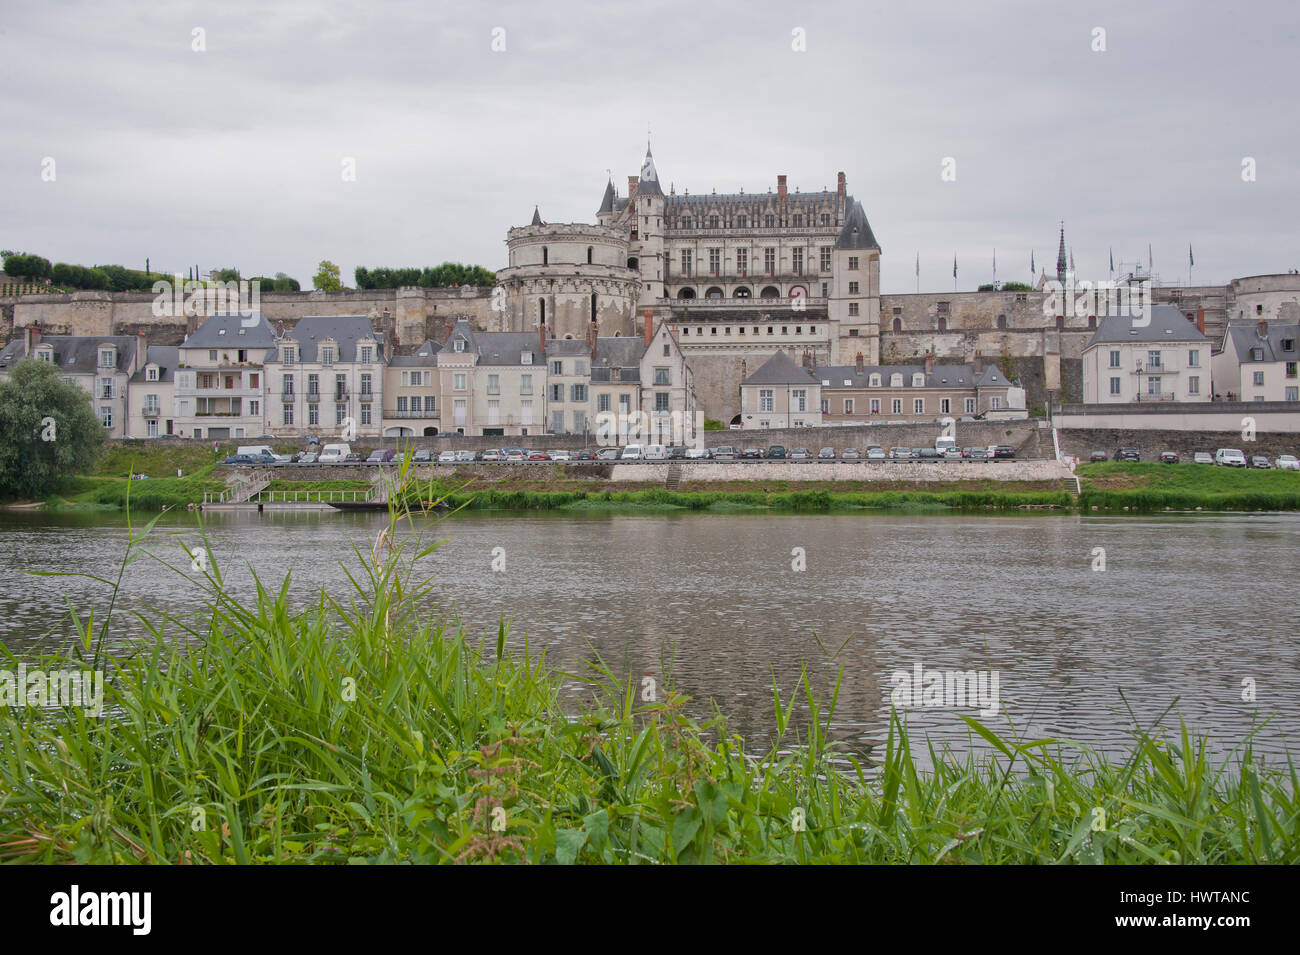 The chateau d'Amboise and the village on the river Loire, seen from the opposite bank Stock Photo